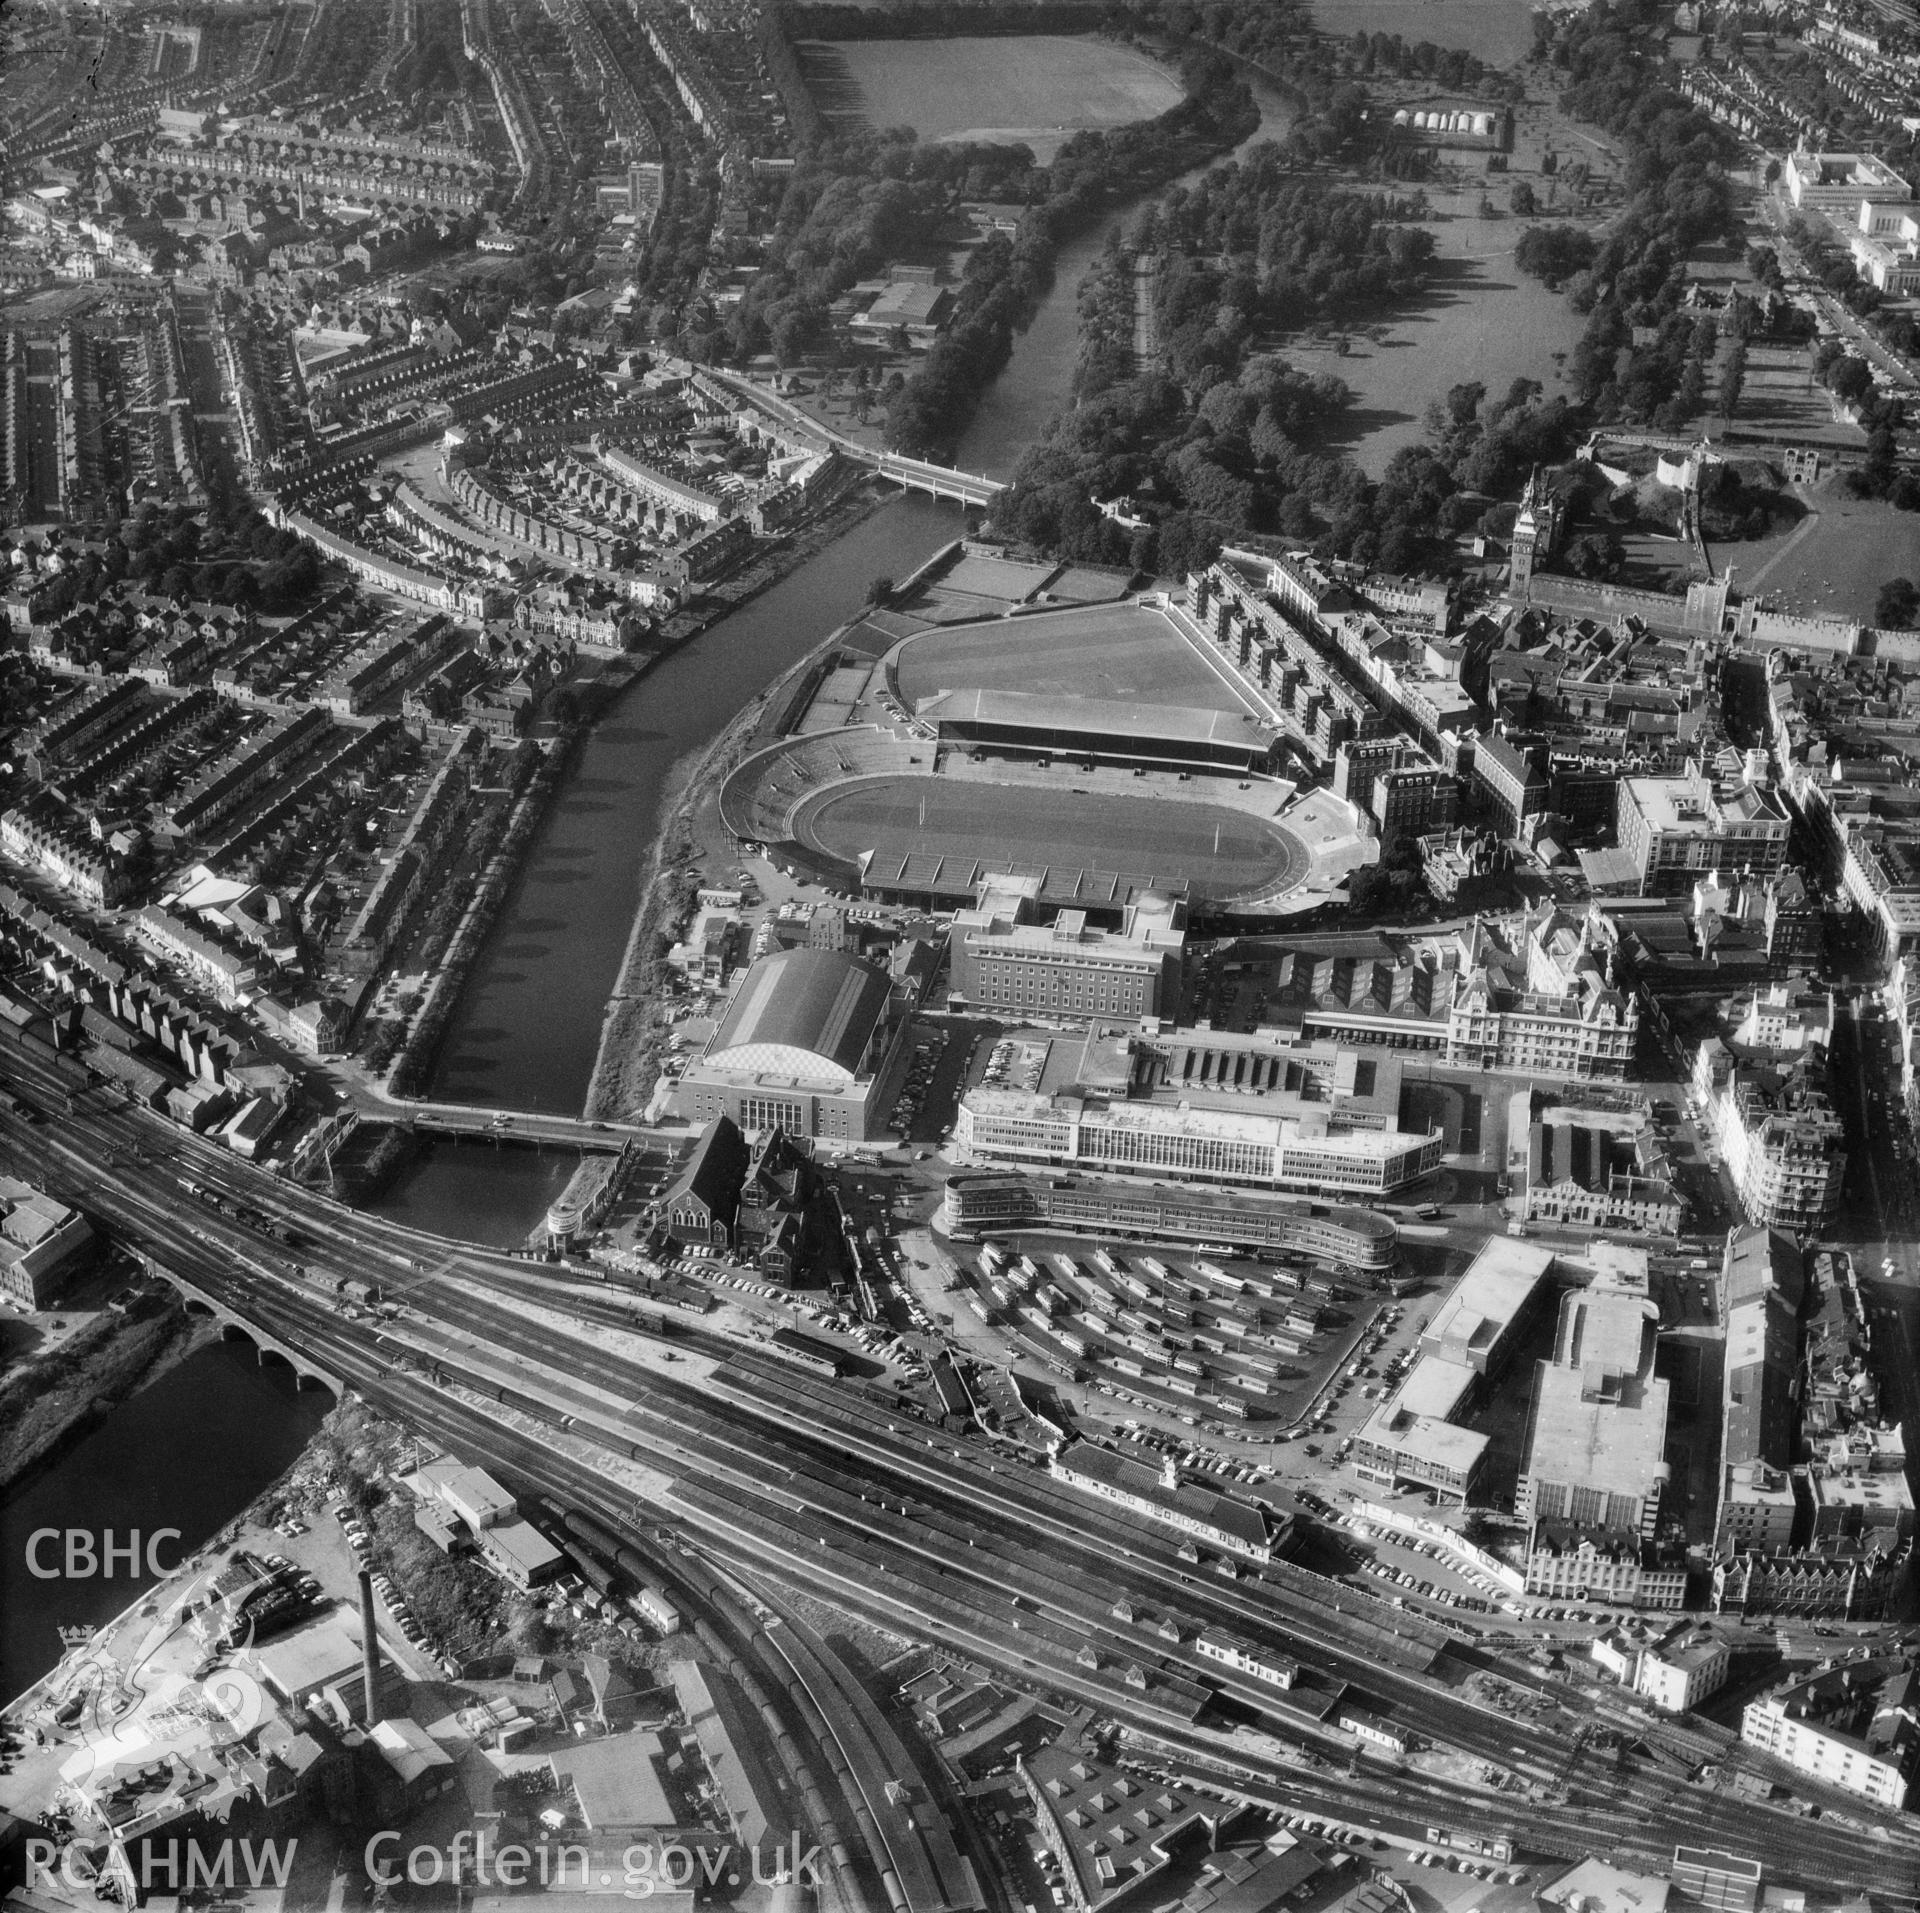 Digital copy of a black and white oblique aerial photograph showing view of the Empire Pool, Cardiff Arms Park and Cardiff Central Station, taken by Aerofilms Ltd, 1959.